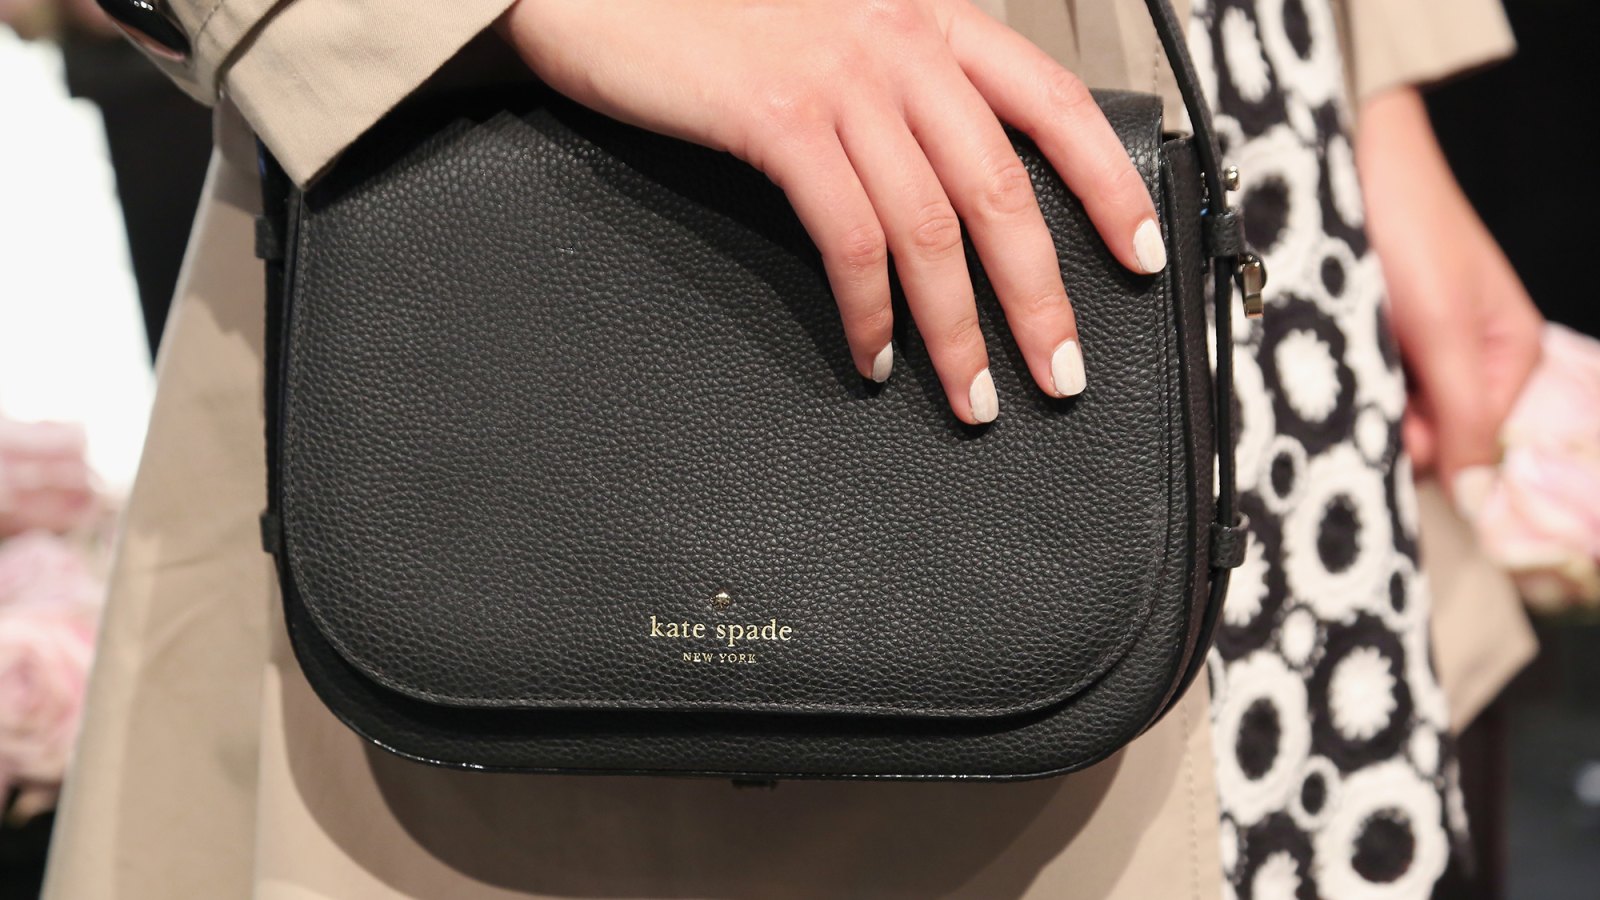 Kate Spade New York Bags Latest Styles